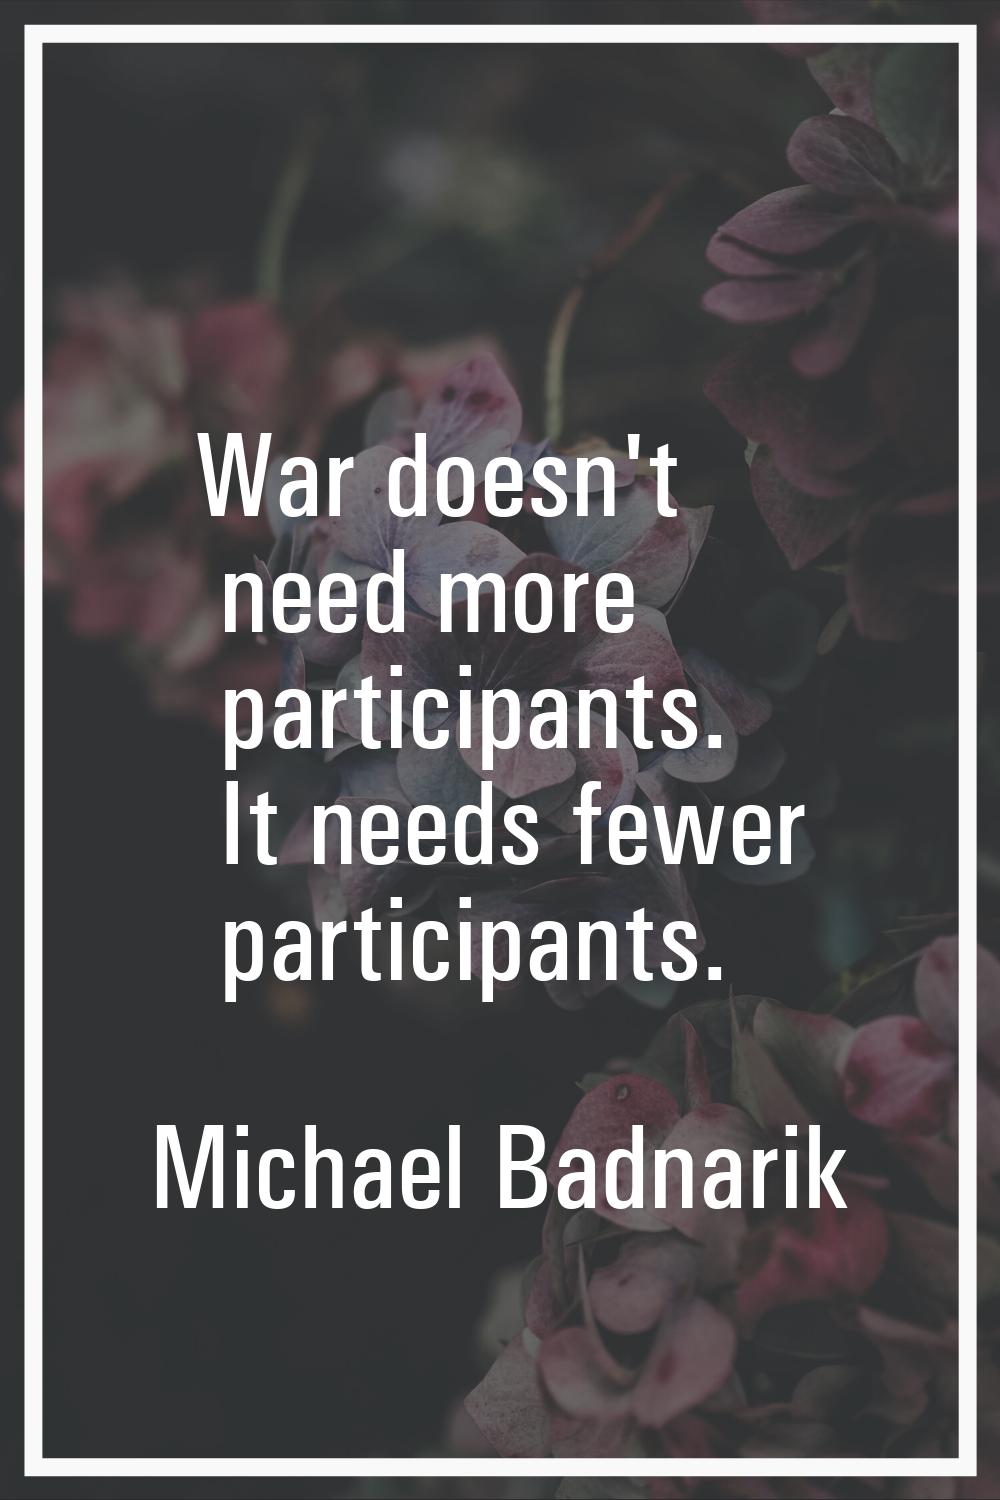 War doesn't need more participants. It needs fewer participants.